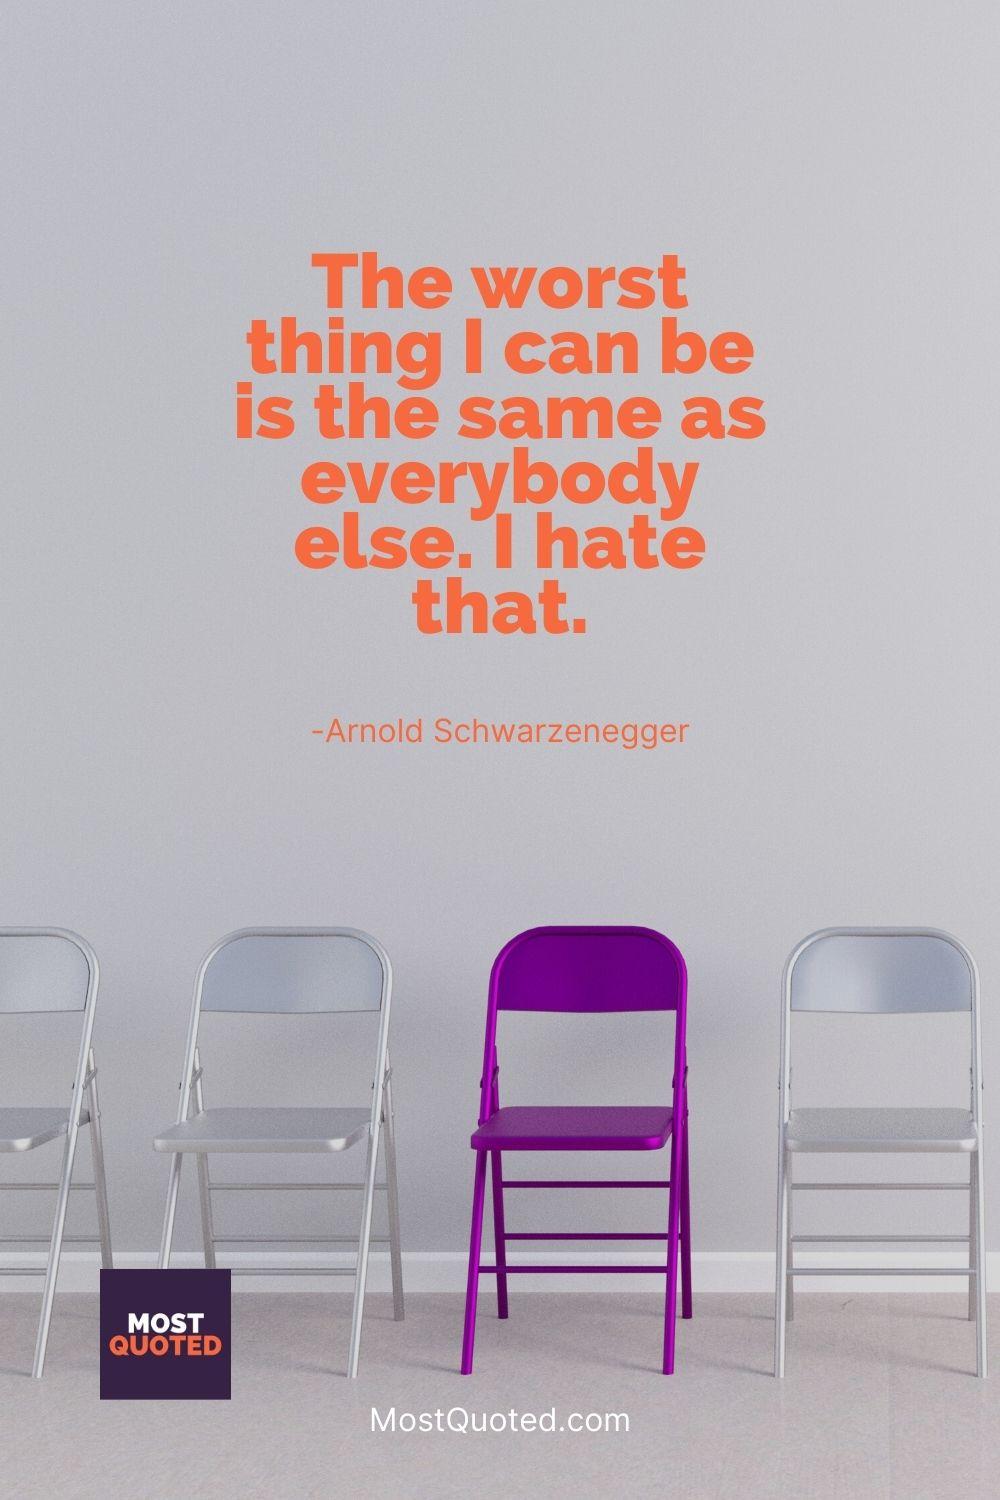 The worst thing I can be is the same as everybody else. I hate that. - Arnold Schwarzenegger